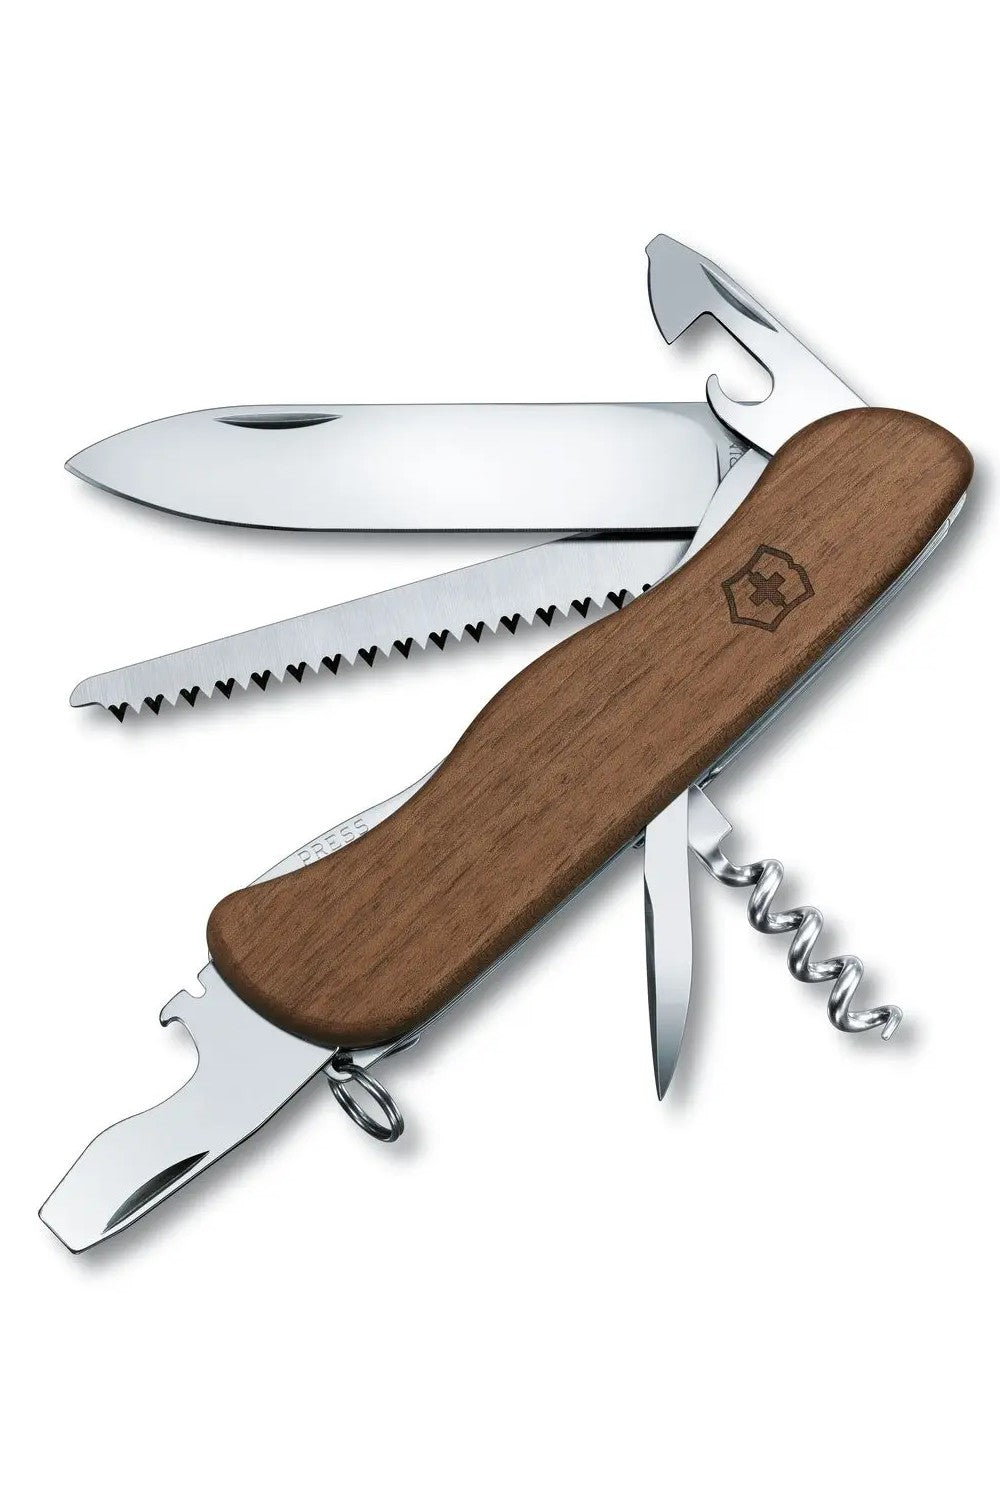 Victorinox Forester Wood Swiss Army Large Pocket Knife in Walnut Wood